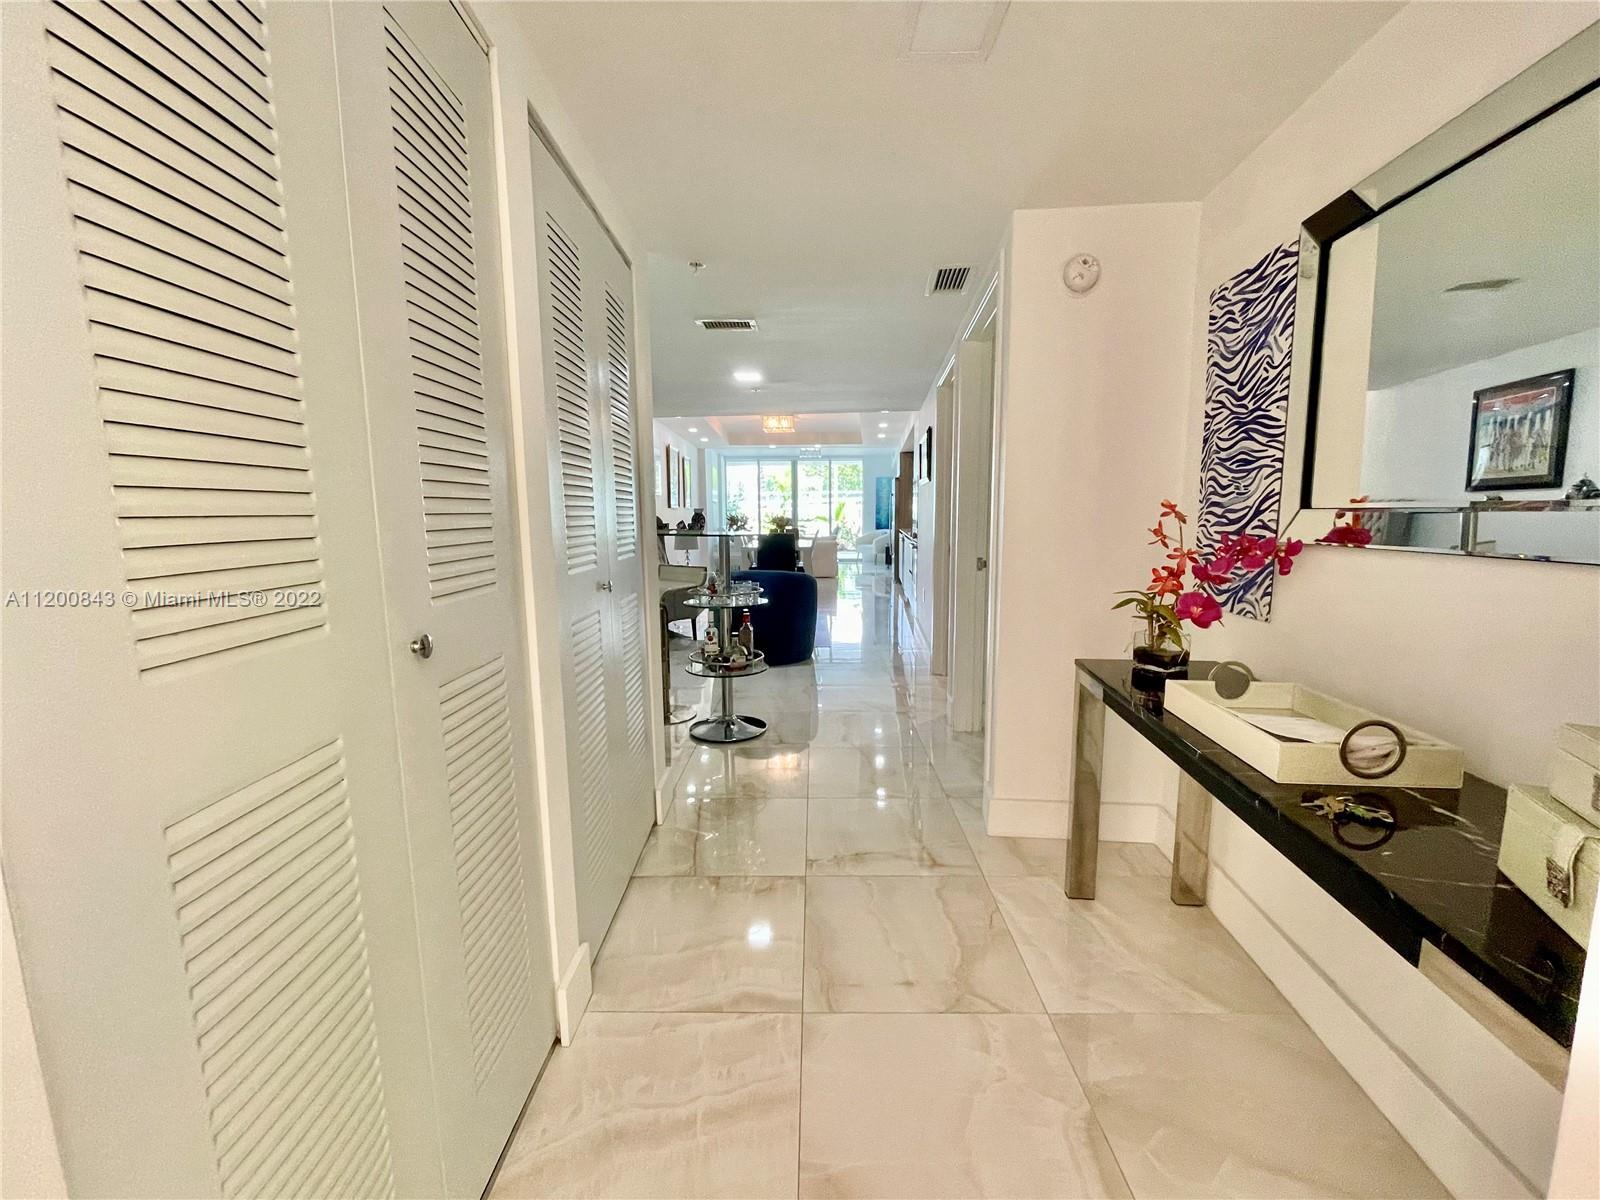 Luxury 2016 2/2 condo located in the heart of Miami Beach. The unit is located on the first floor overlooking the pool and the bay. Peloro building is a boutique condominium fashioned after the Sicilian lighthouse. The luxury tower is perfectly located near the bay allowing spectacular views from inside the residences and walking distance to the beach, shopping centers, restaurants and family parks.